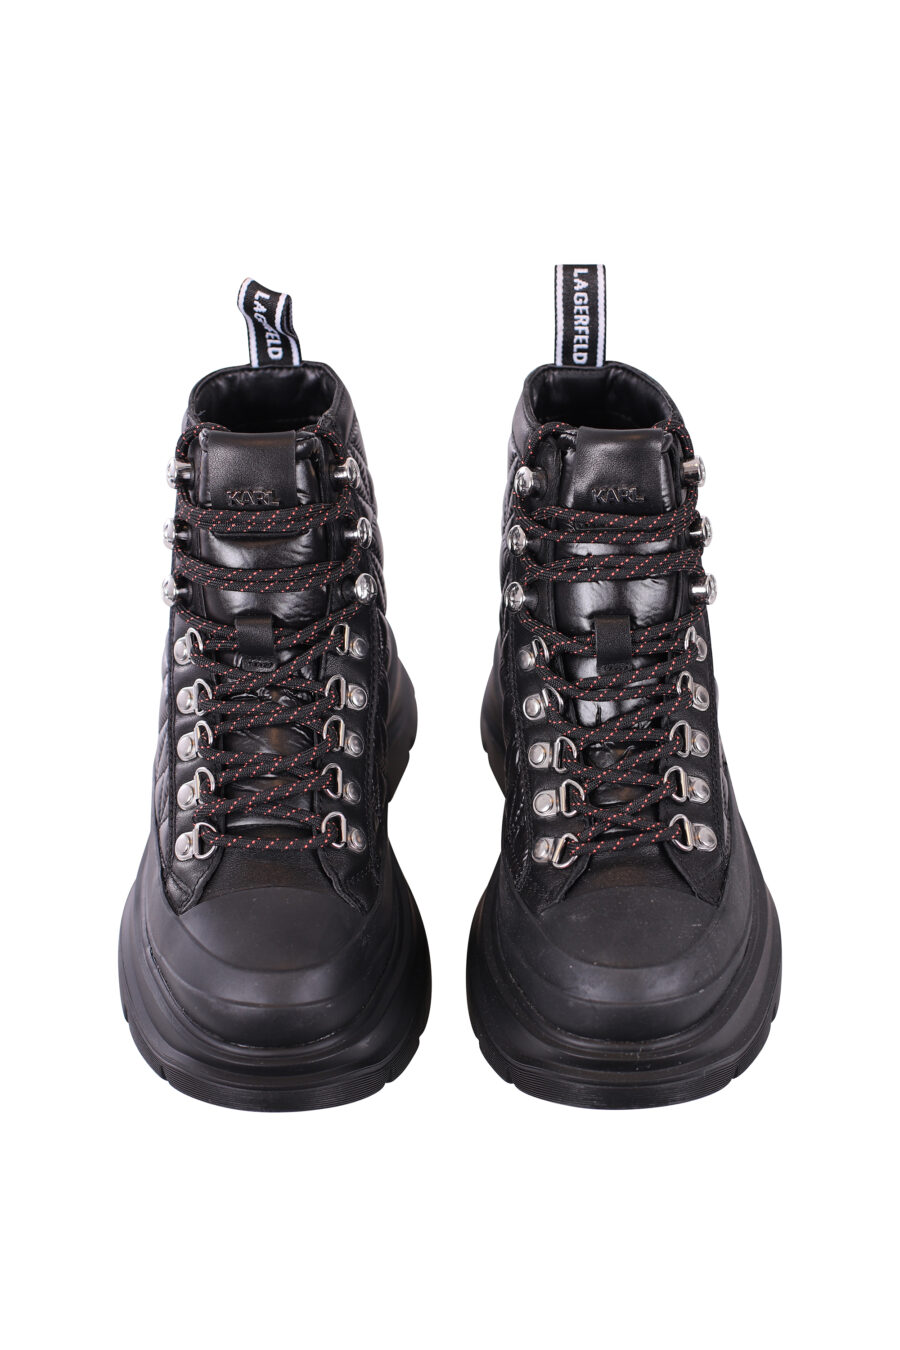 Black ankle boots with silver monogram logo and laces - IMG 5664